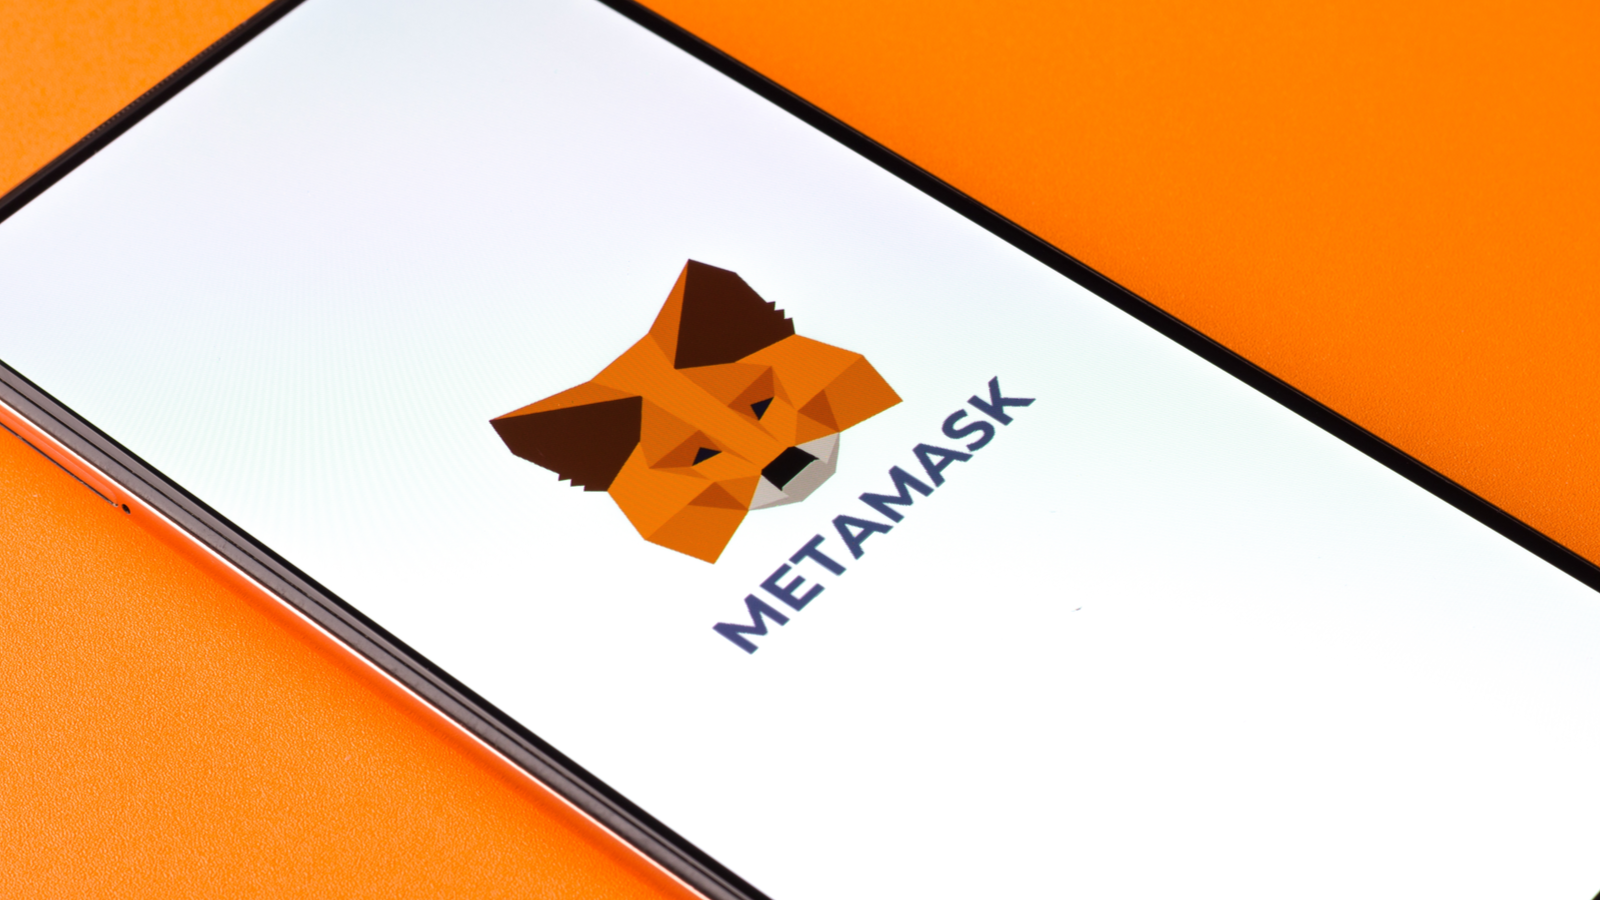 Metamask-Users-Complain-About-Connection-Issues-as-Wallet's-Default-Endpoint-Suffers-From-Major-Outage